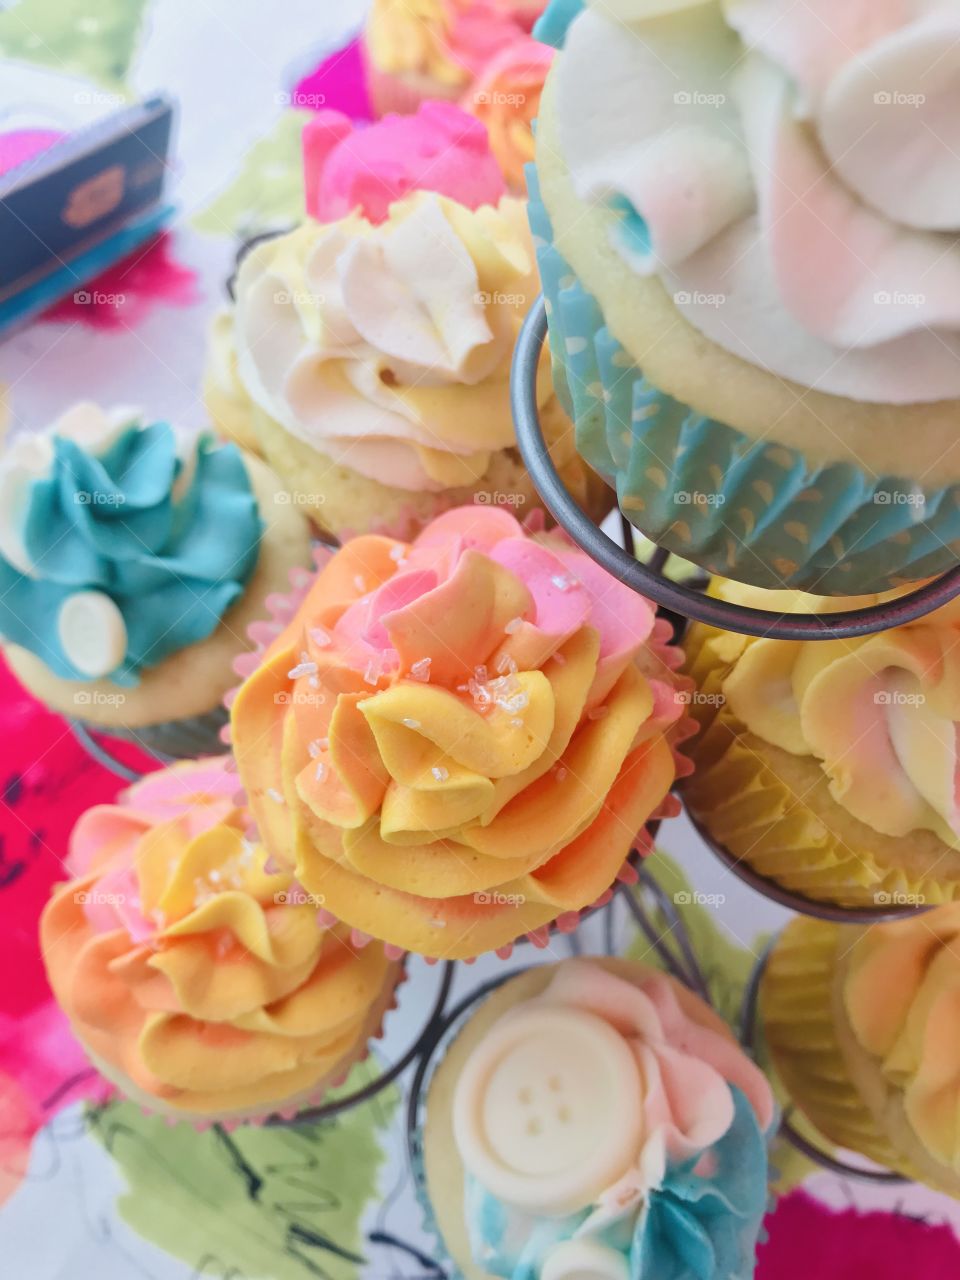 Gorgeous delicious yummy cupcakes beautifully decorated with multi colored frosting and chocolate molds! 